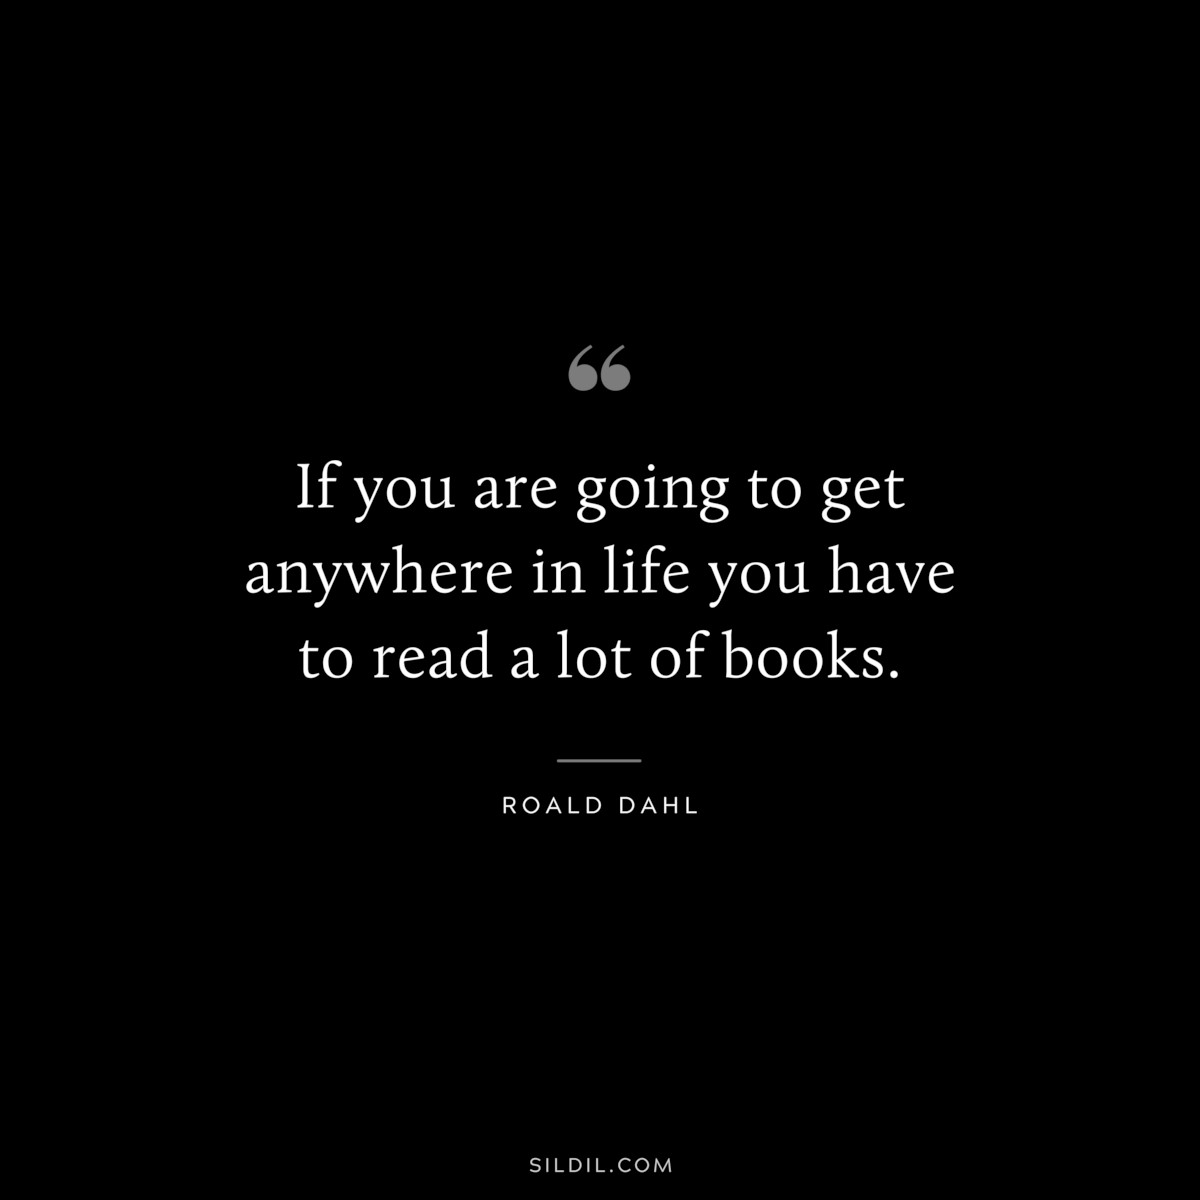 If you are going to get anywhere in life you have to read a lot of books. ― Roald Dahl